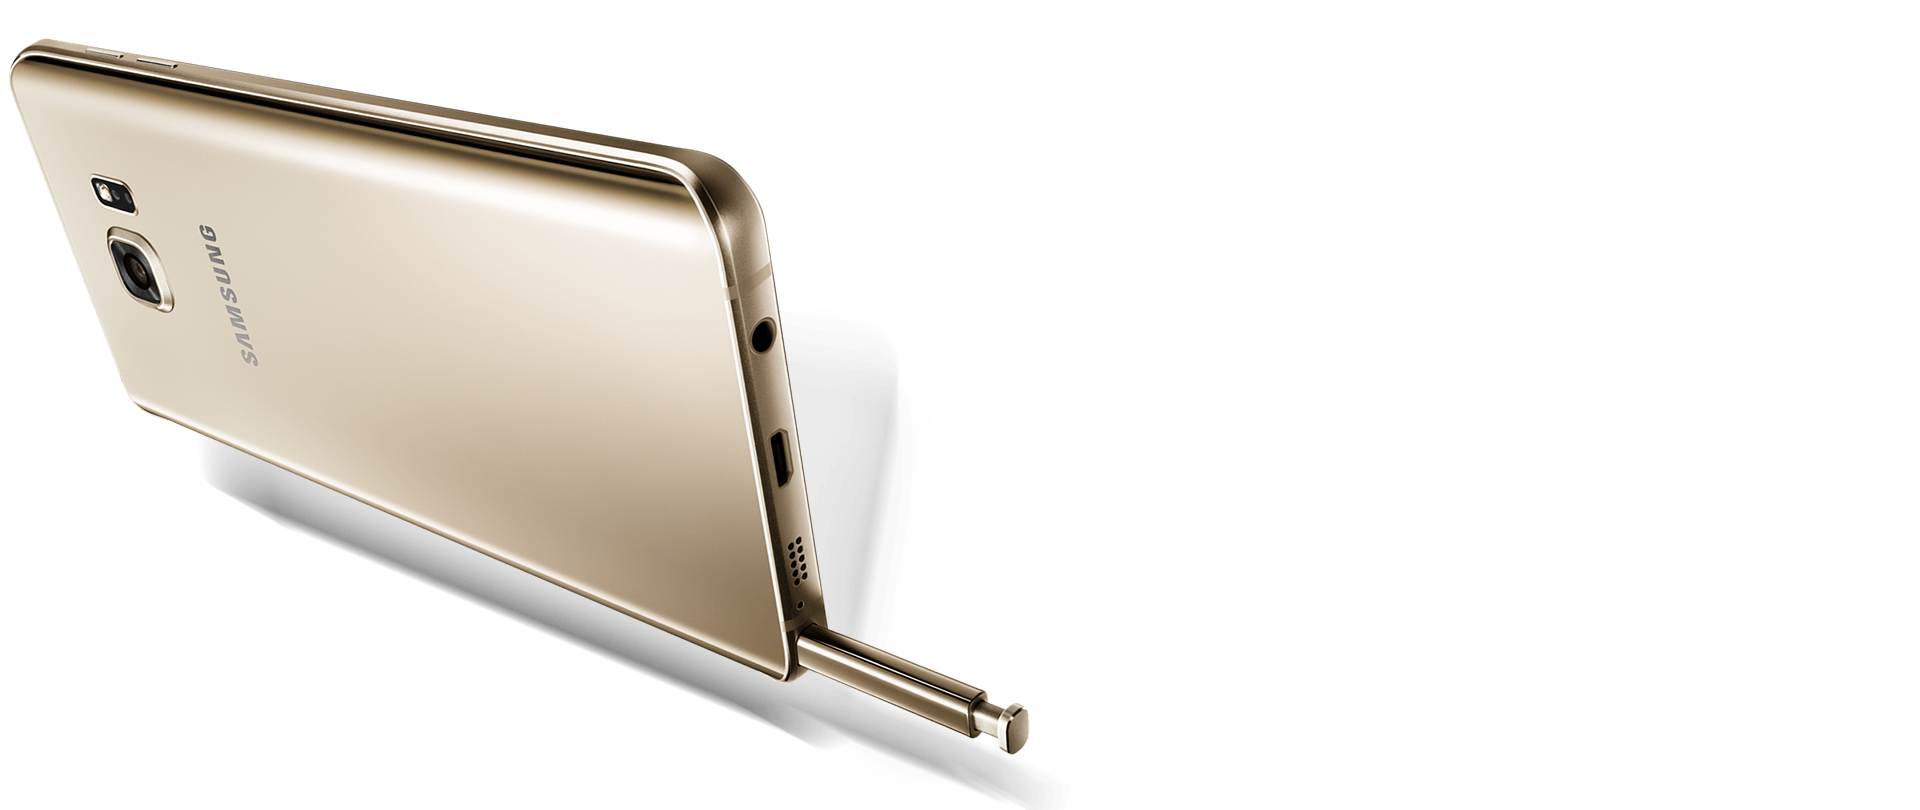 Back of gold platinum Galaxy Note5 and S Pen